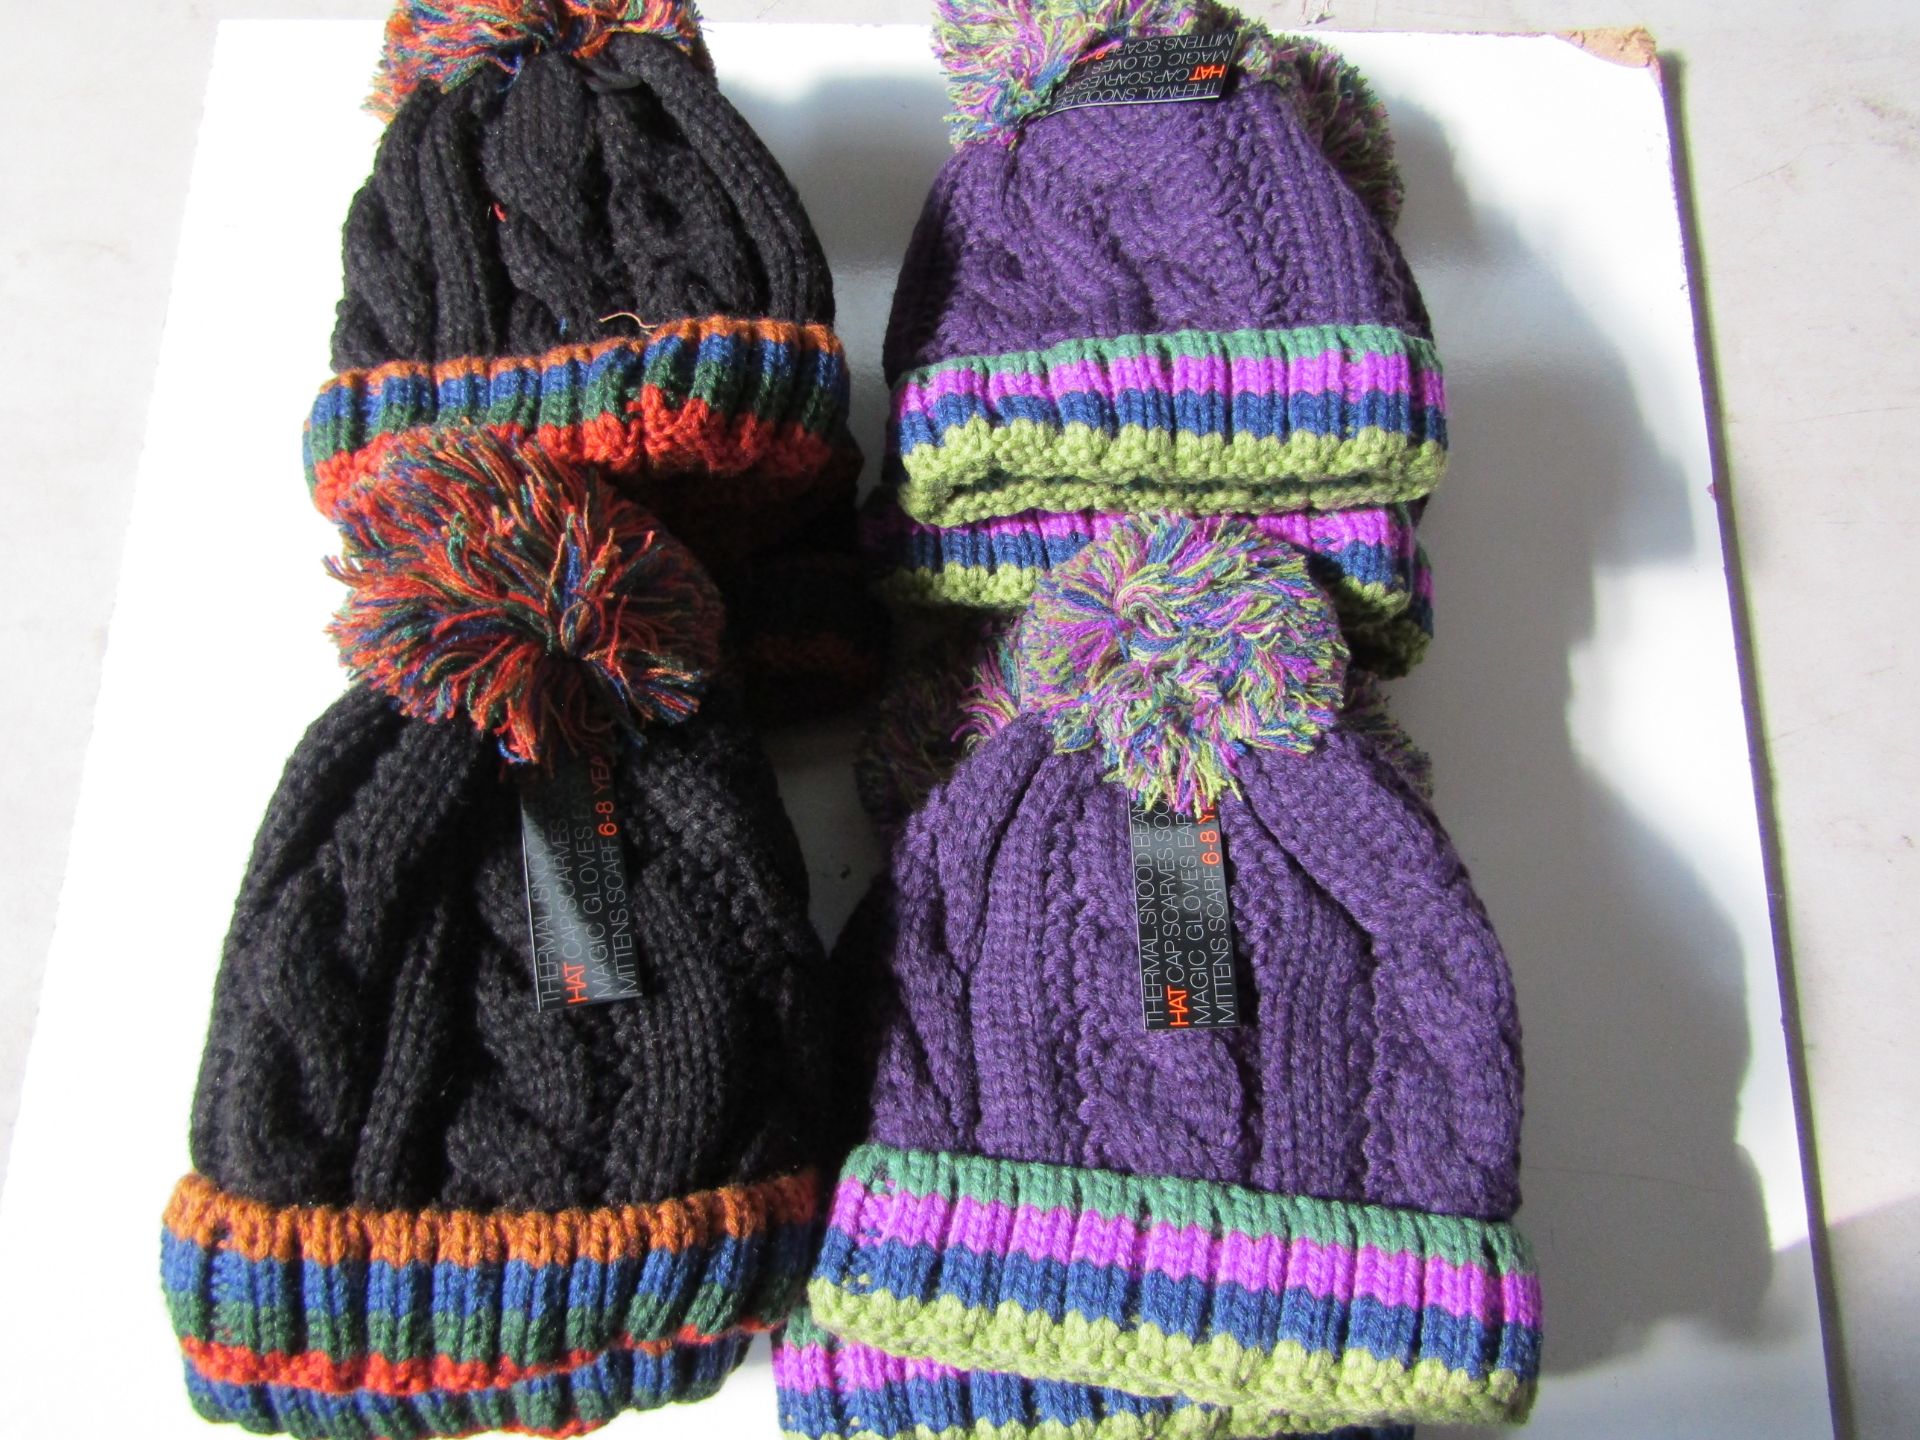 12 X Kids Chunky Bobble Hats 6 X 3-4 yrs & 6 X 7-10yrs All New With Tags